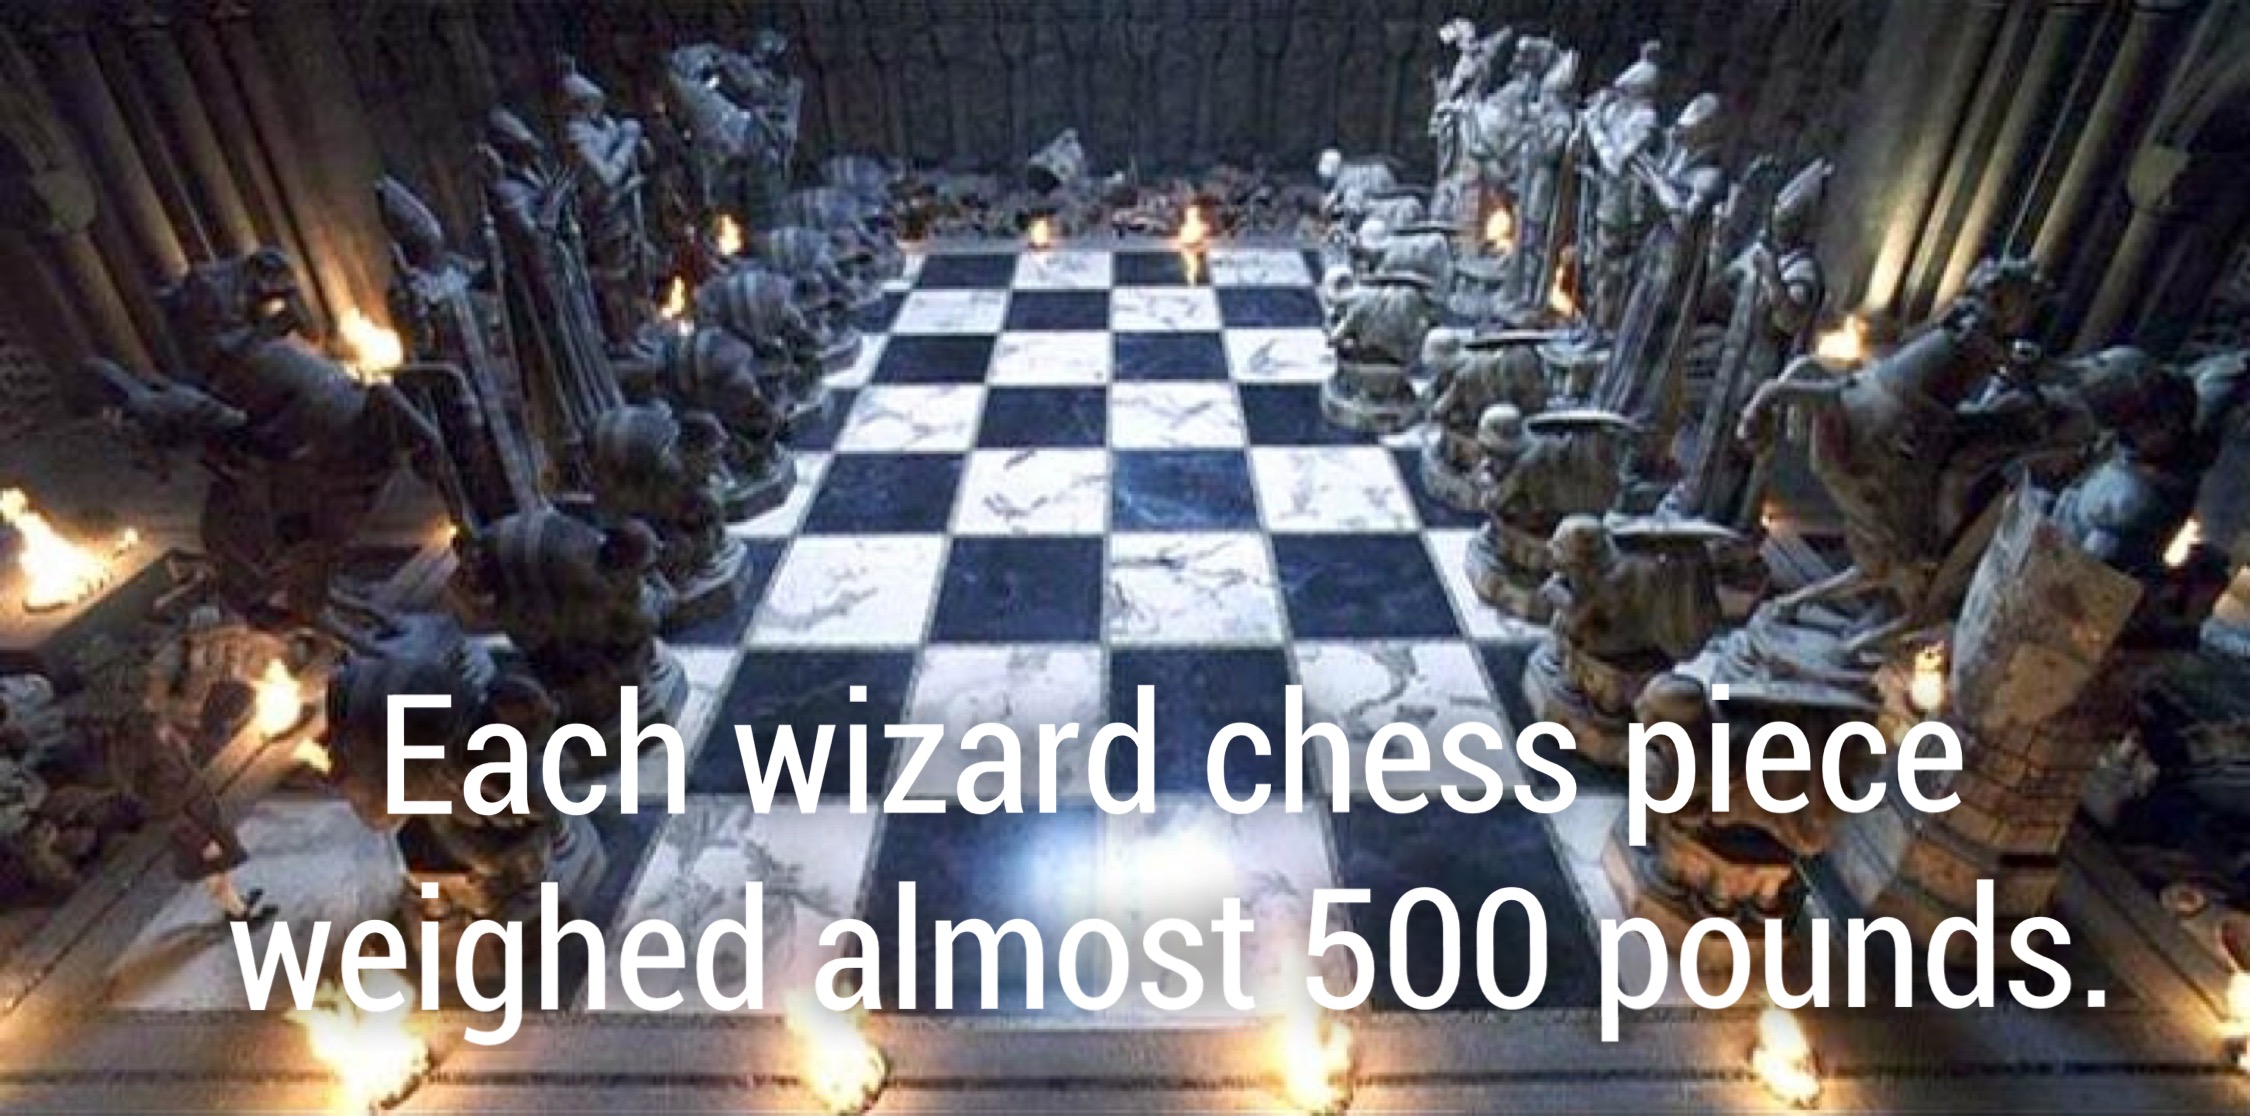 harry potter chess pawn - Each wizard chess piece weighed almost 500 pounds.